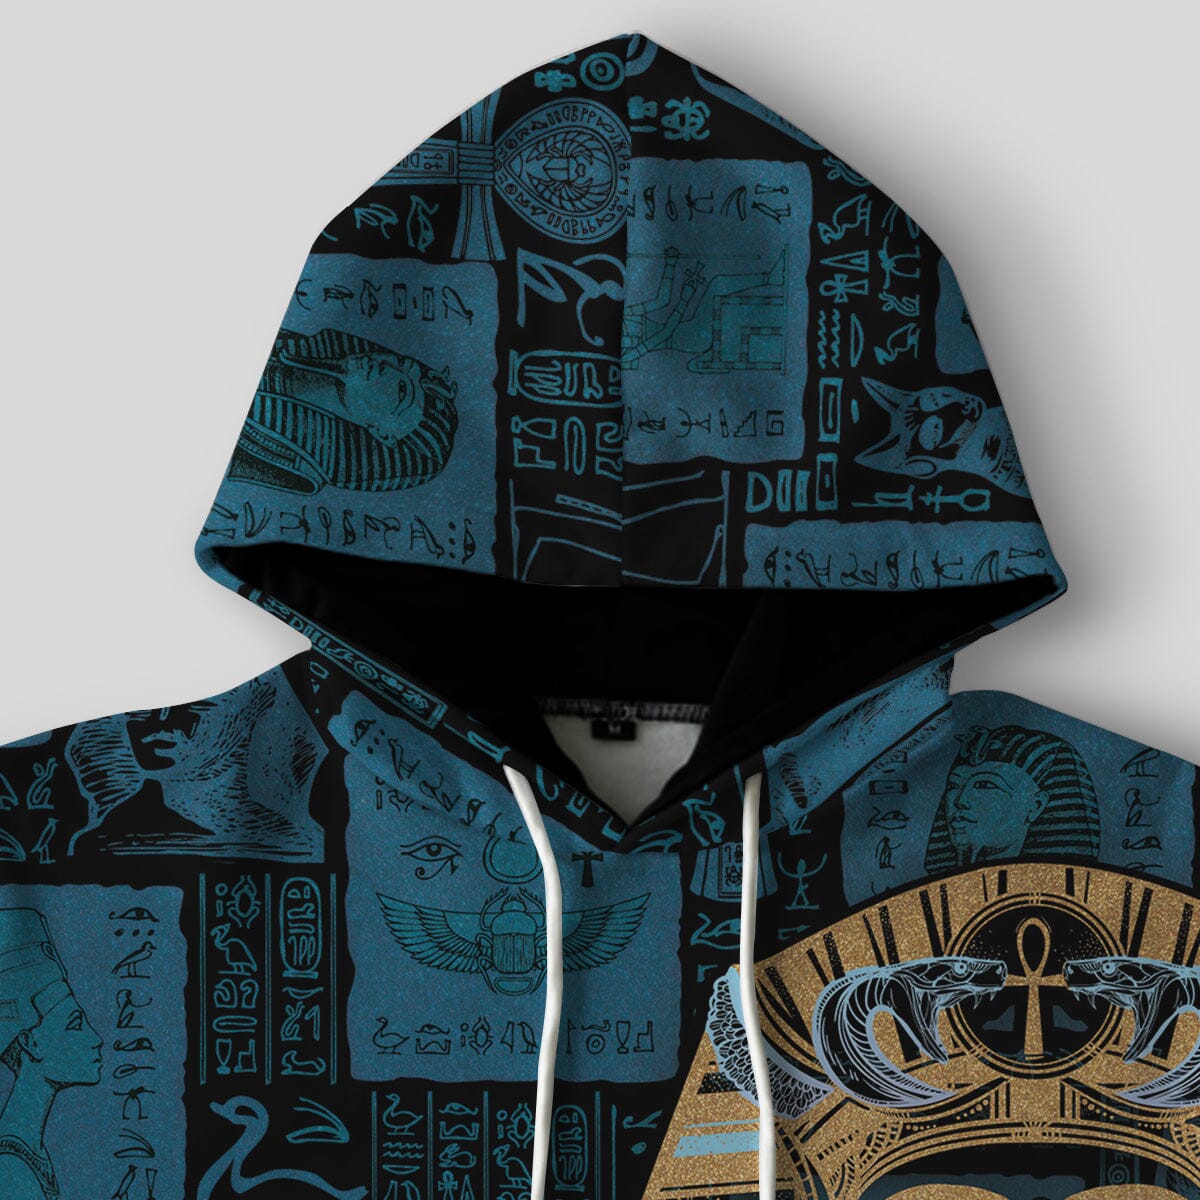 Neon Egyptian King Pattern All-over Hoodie Hoodie Tianci 